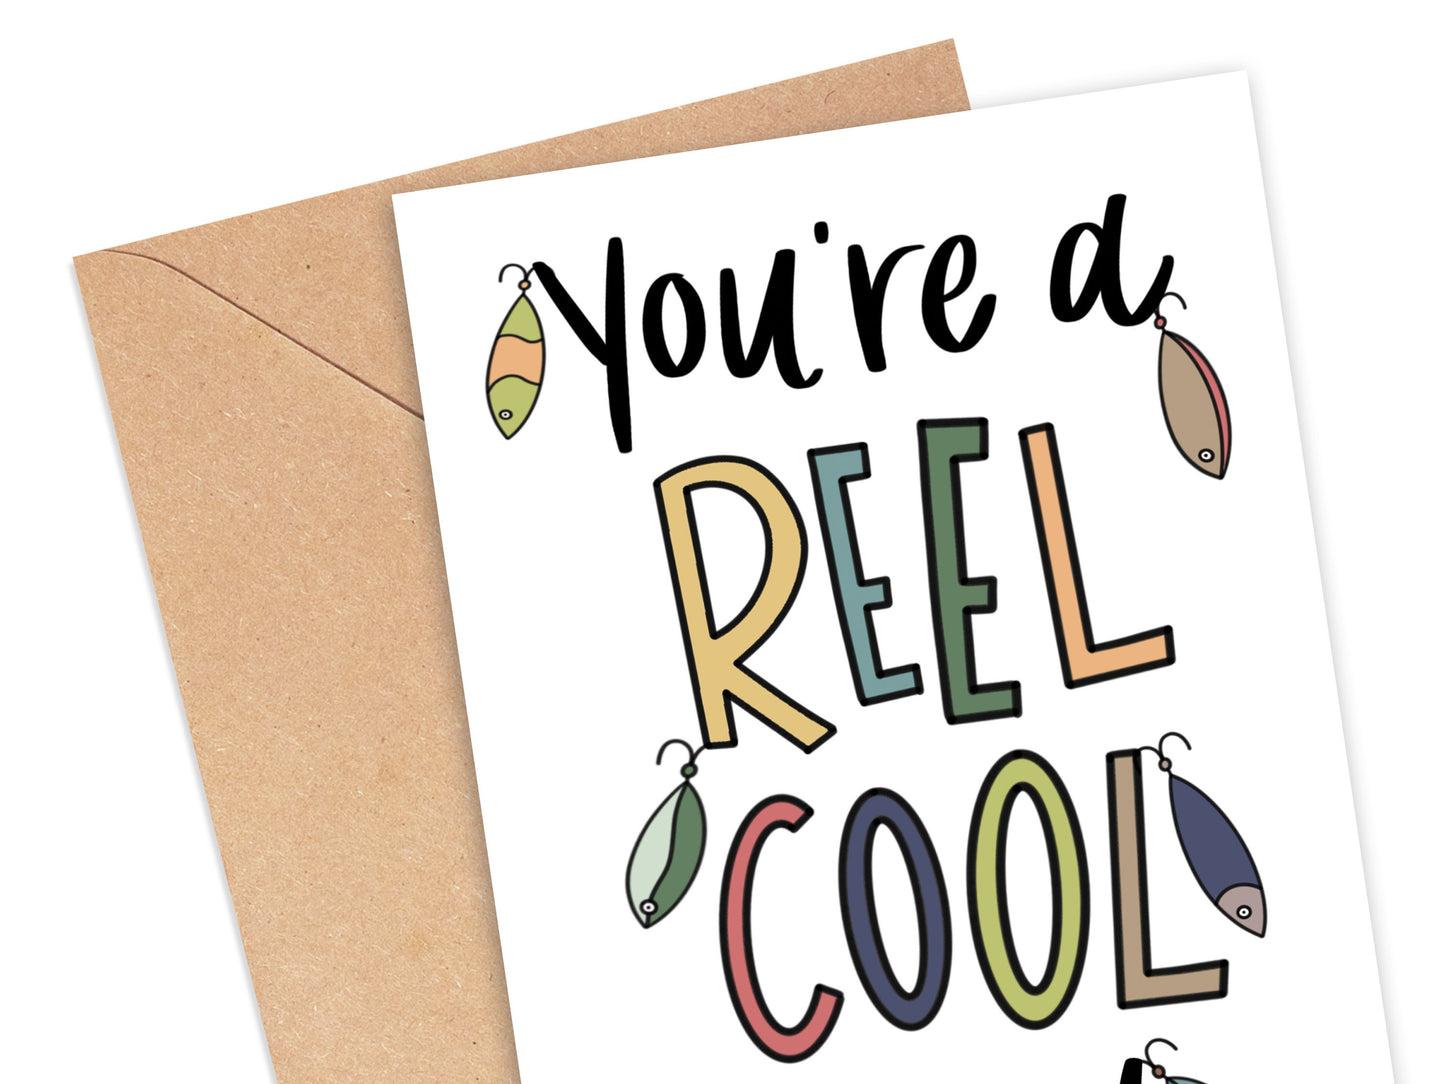 You're A Reel Cool Dad Card Simply Happy Cards